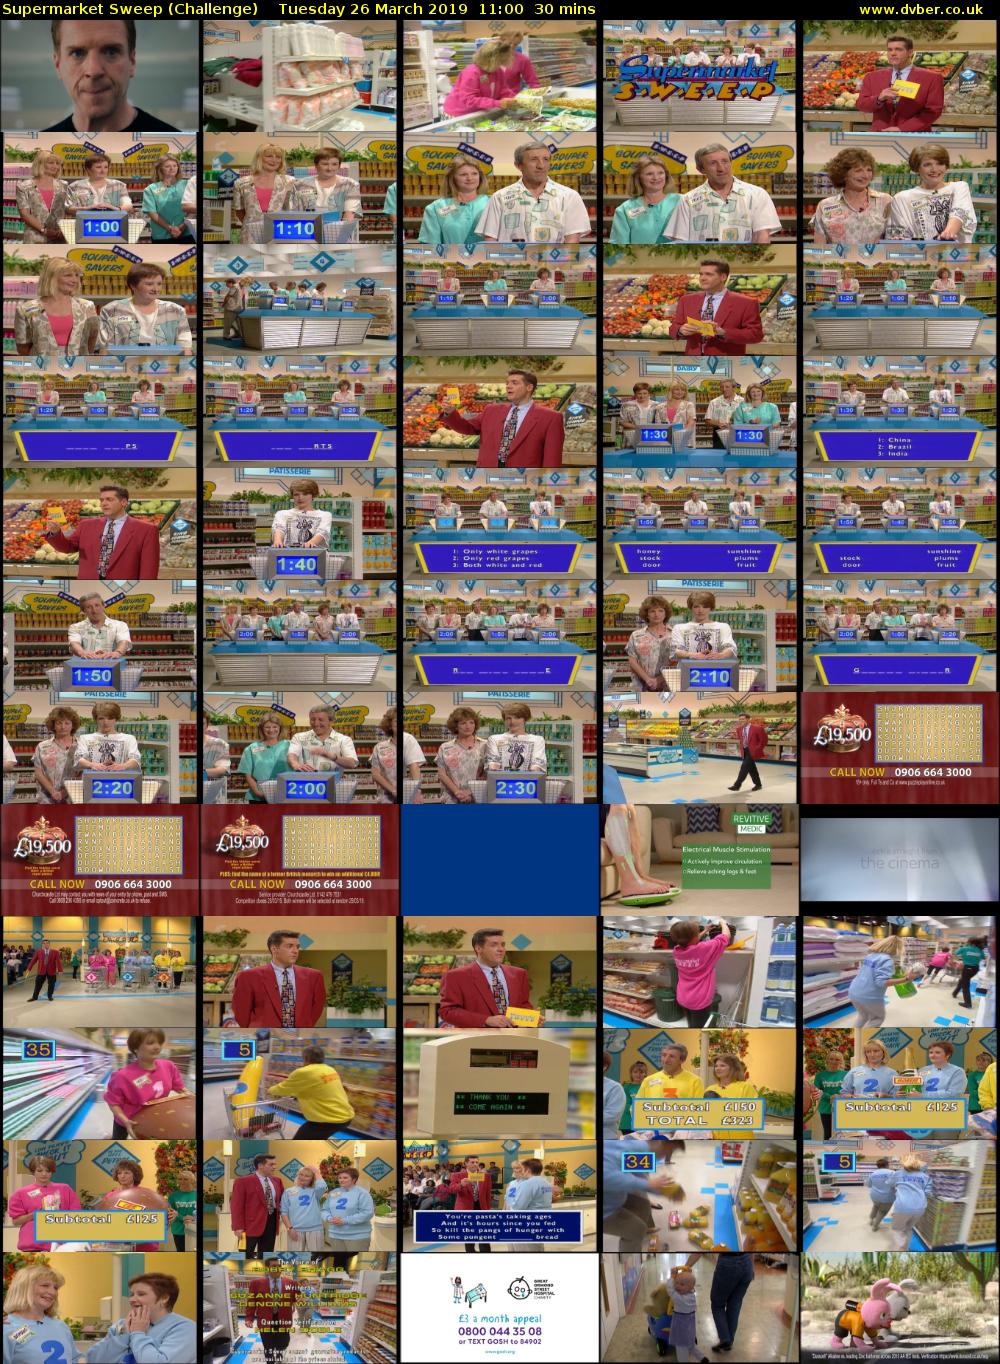 Supermarket Sweep (Challenge) Tuesday 26 March 2019 11:00 - 11:30